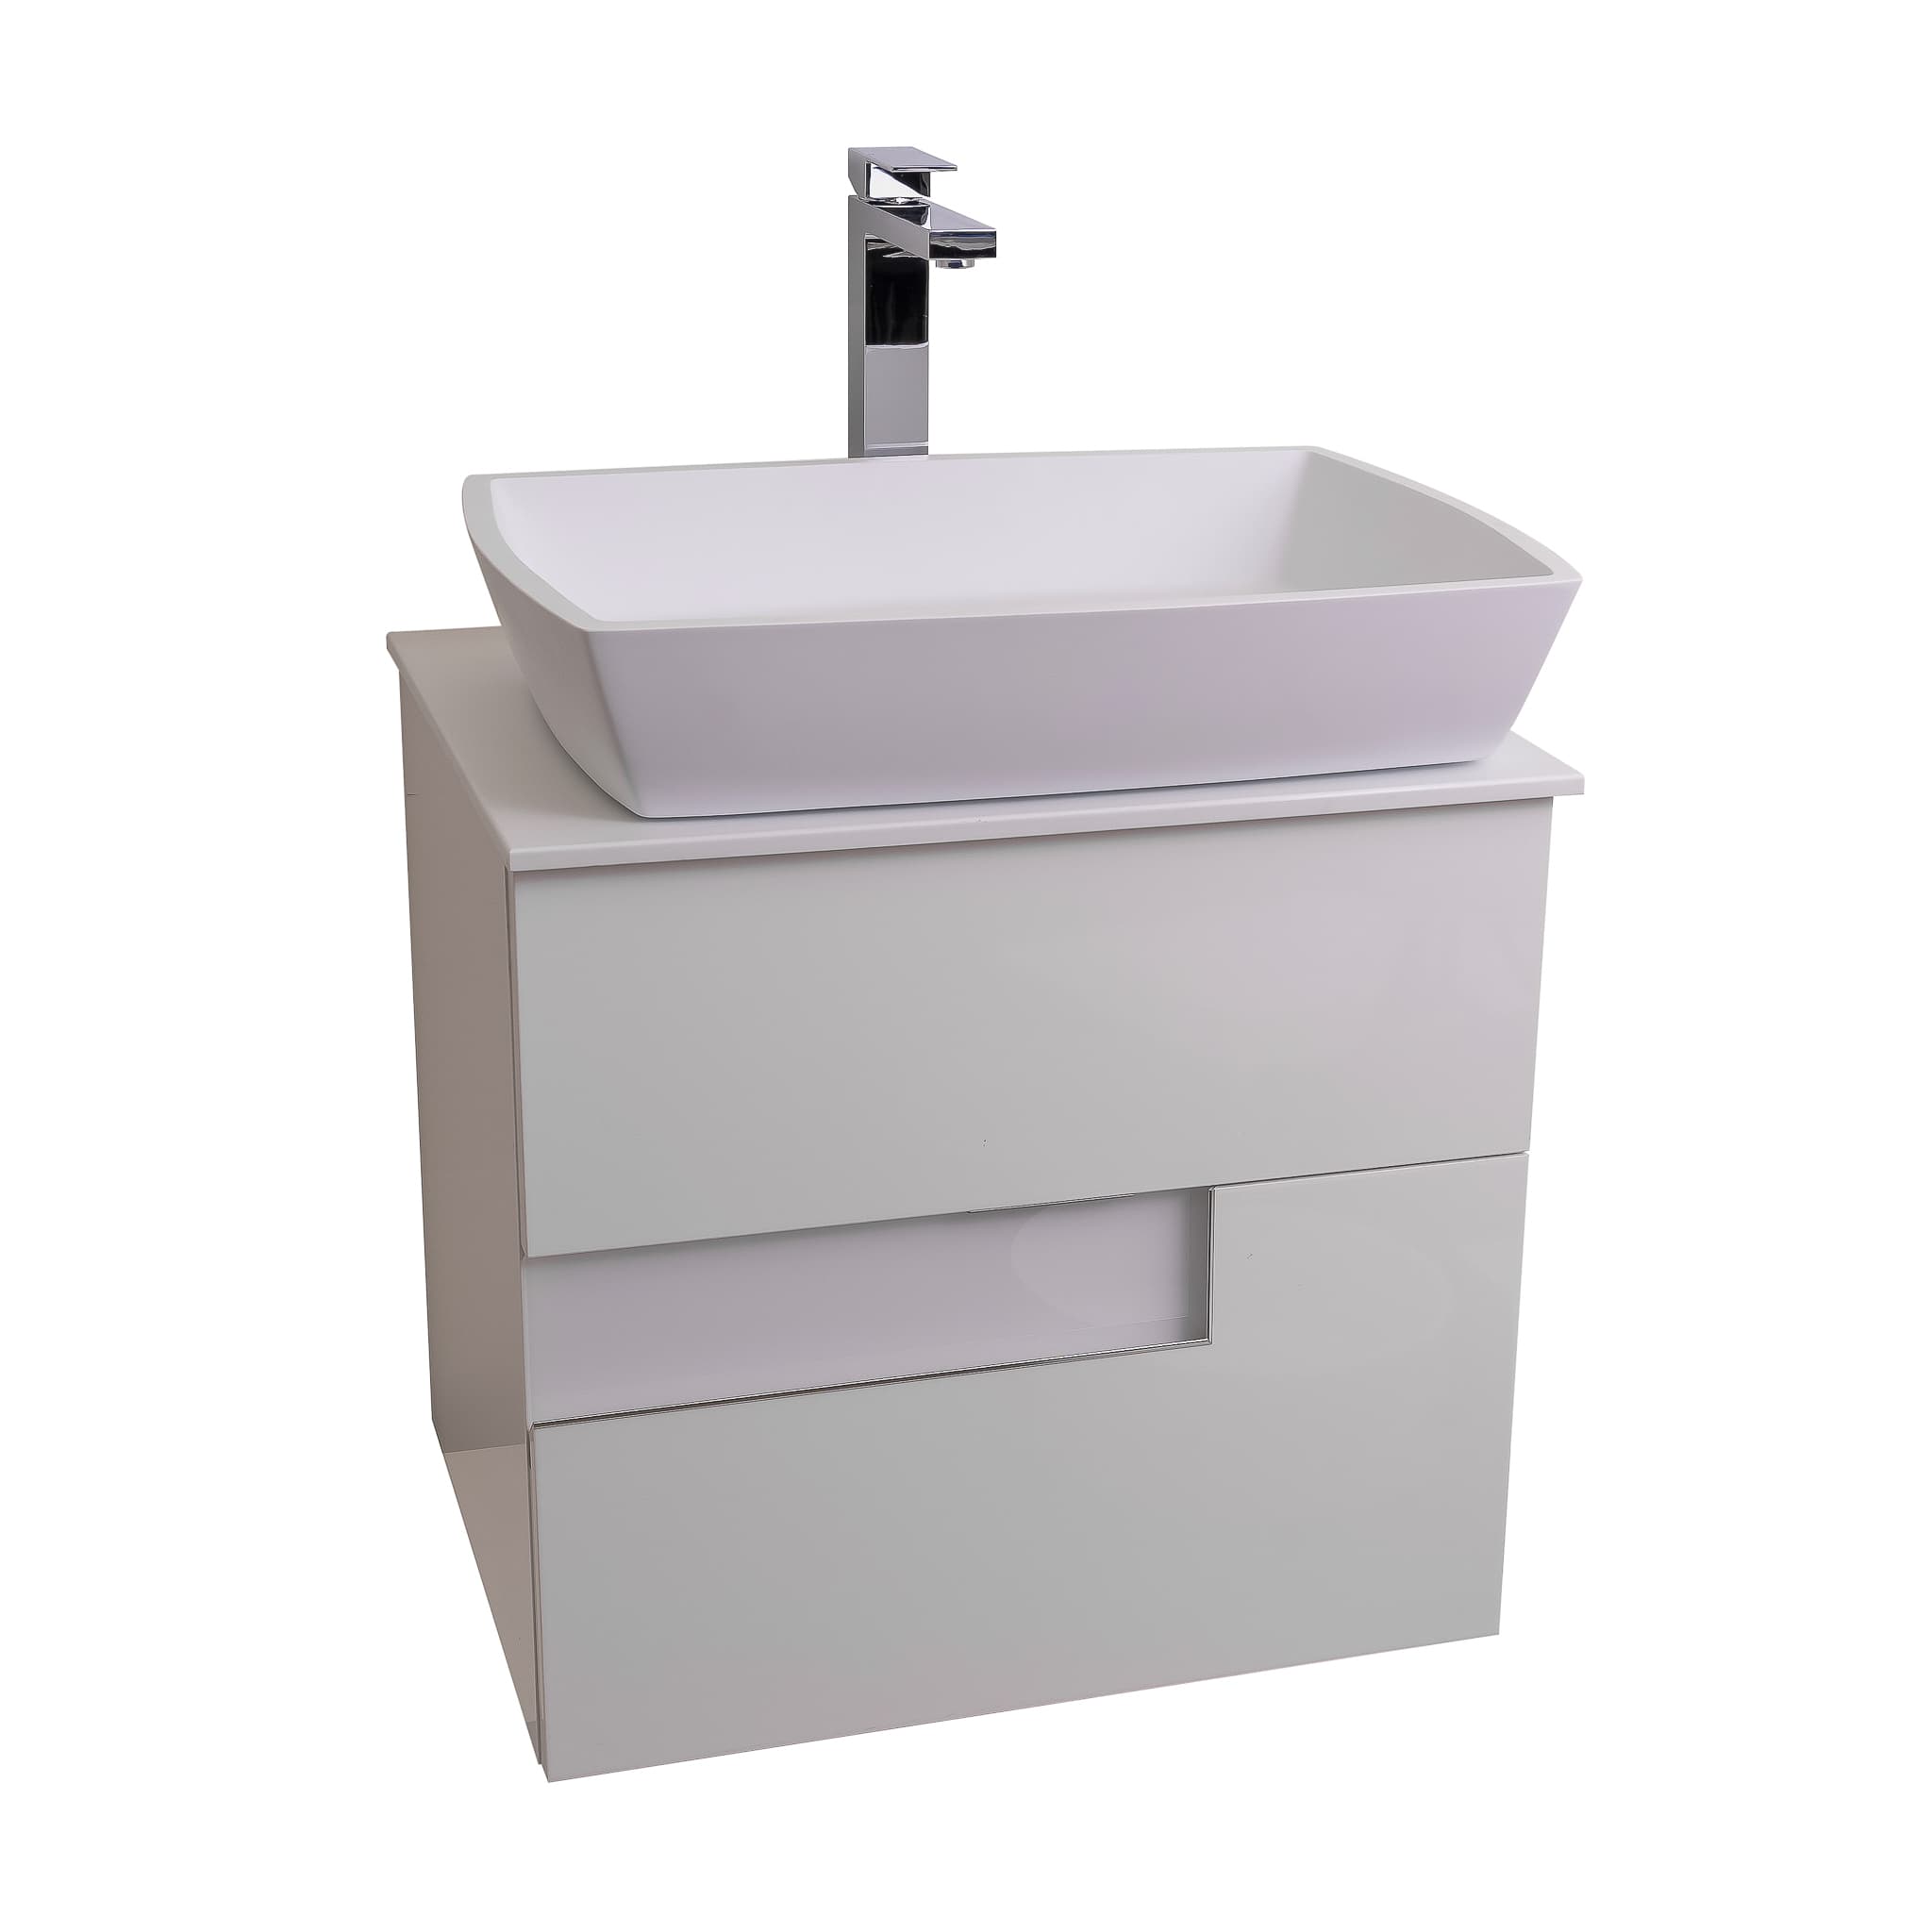 Vision 23.5 White High Gloss Cabinet, Solid Surface Flat White Counter And Square Solid Surface White Basin 1316, Wall Mounted Modern Vanity Set